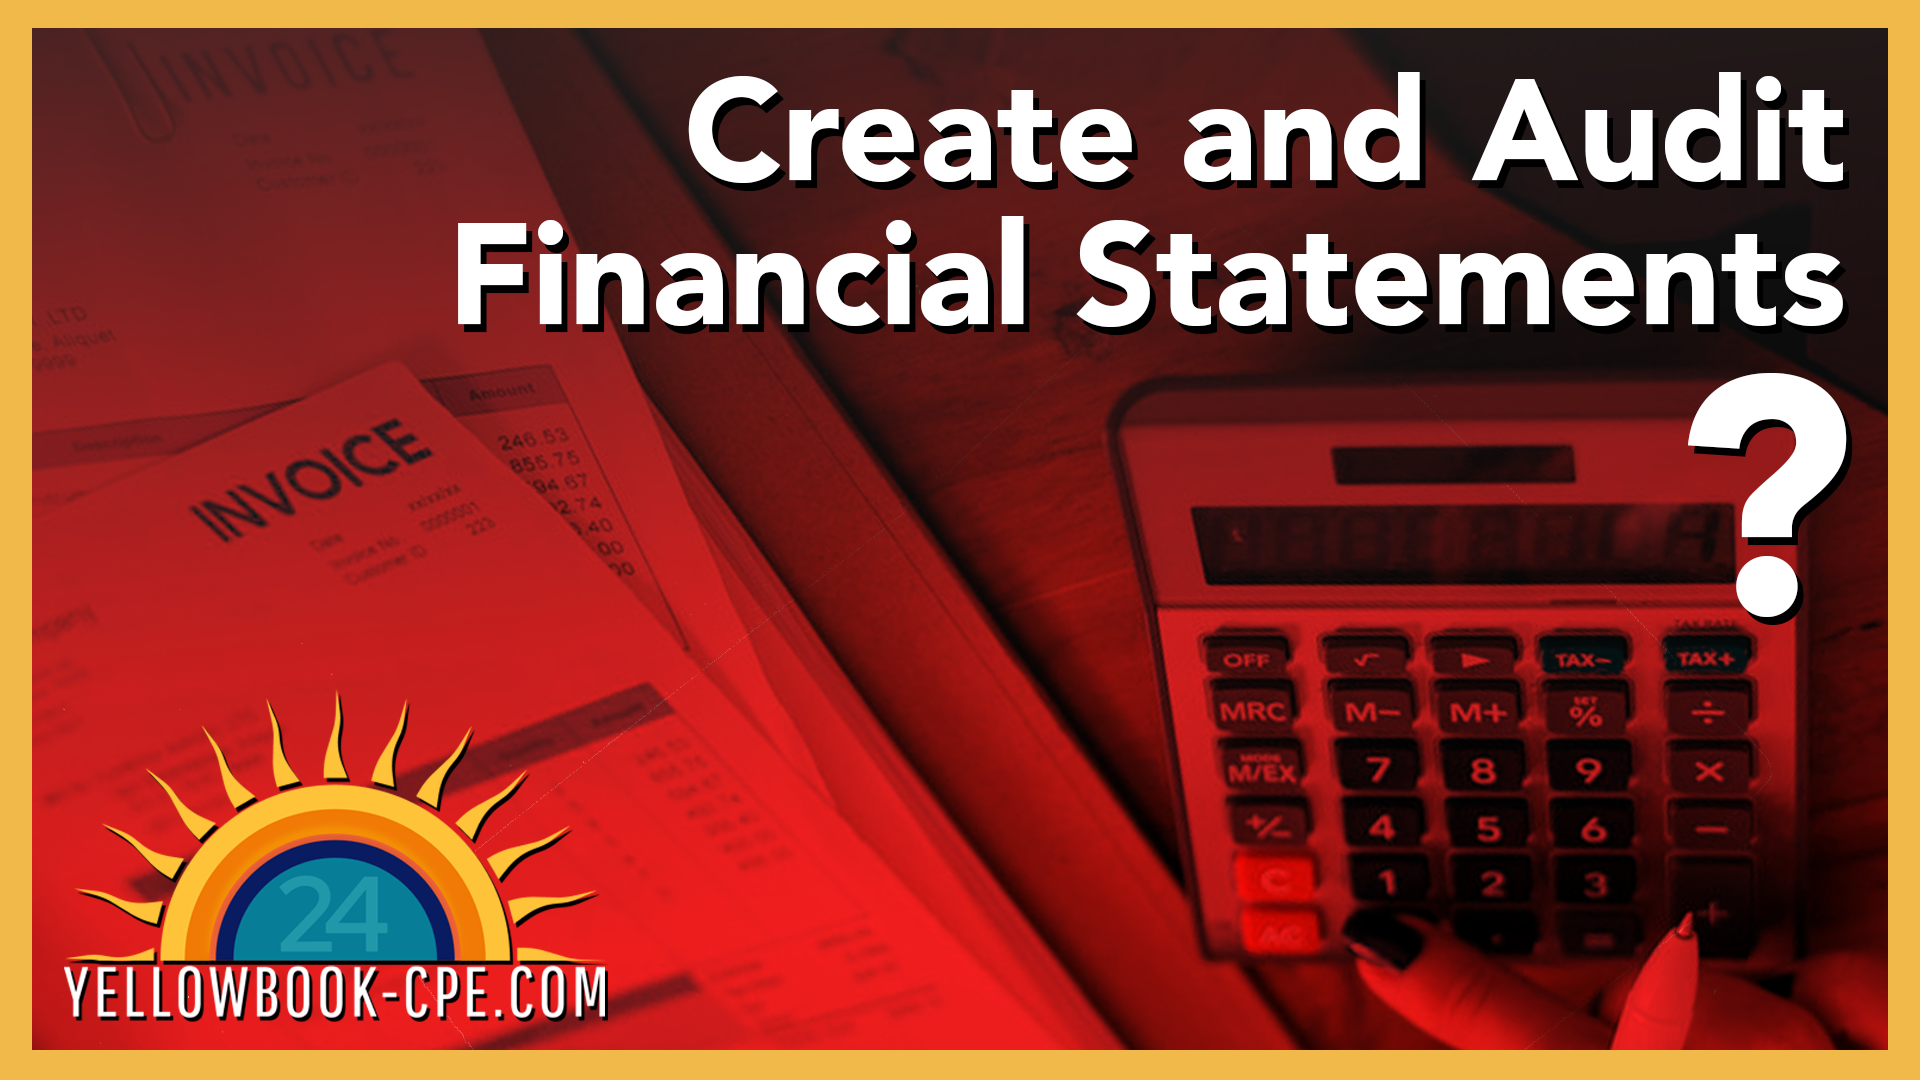 Can I Both Create and Audit the Financial Statements?